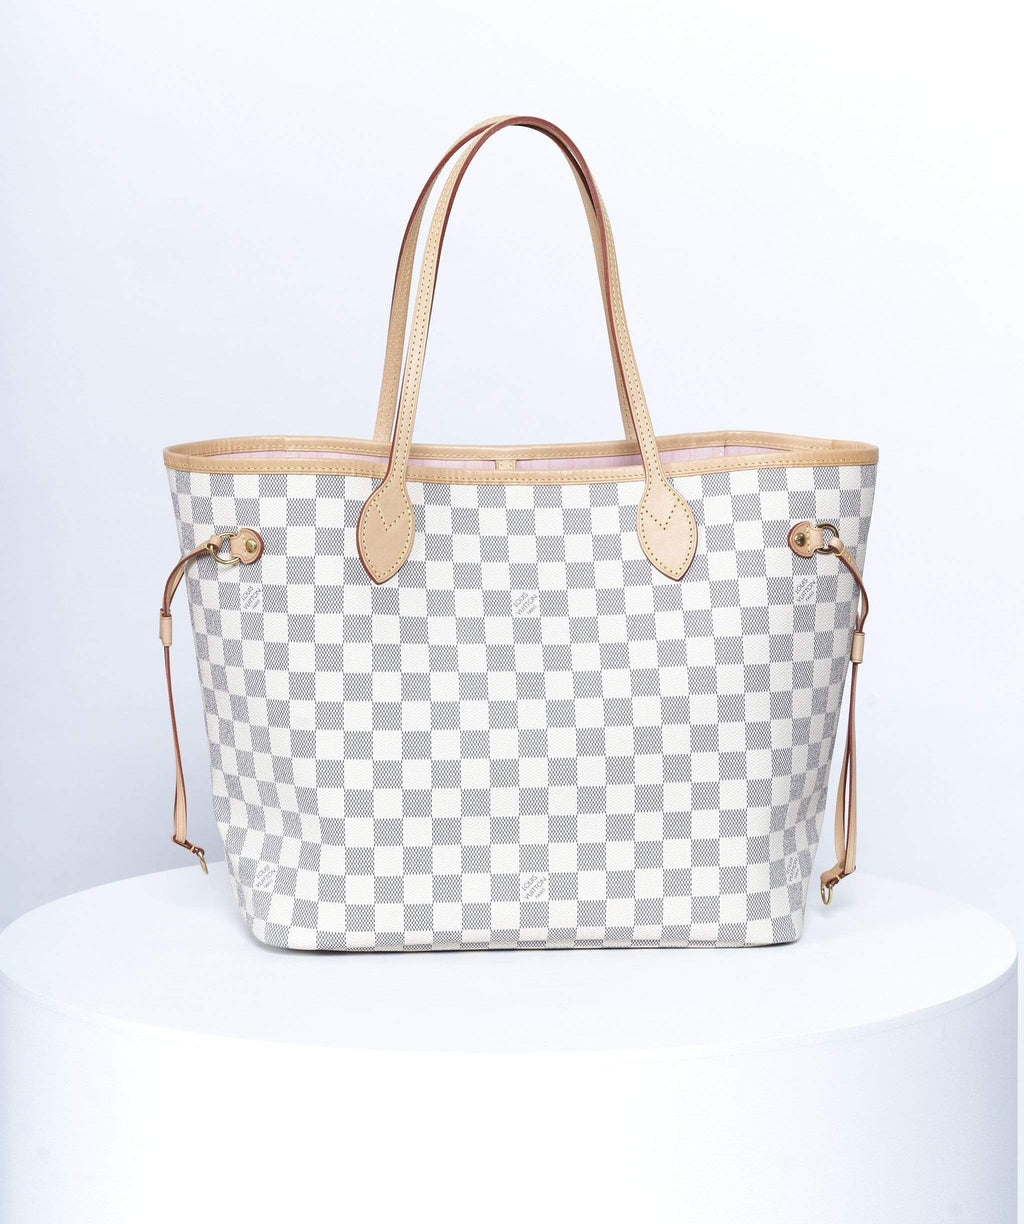 LV Neverfull MM in beautiful condition with box, dustbag and